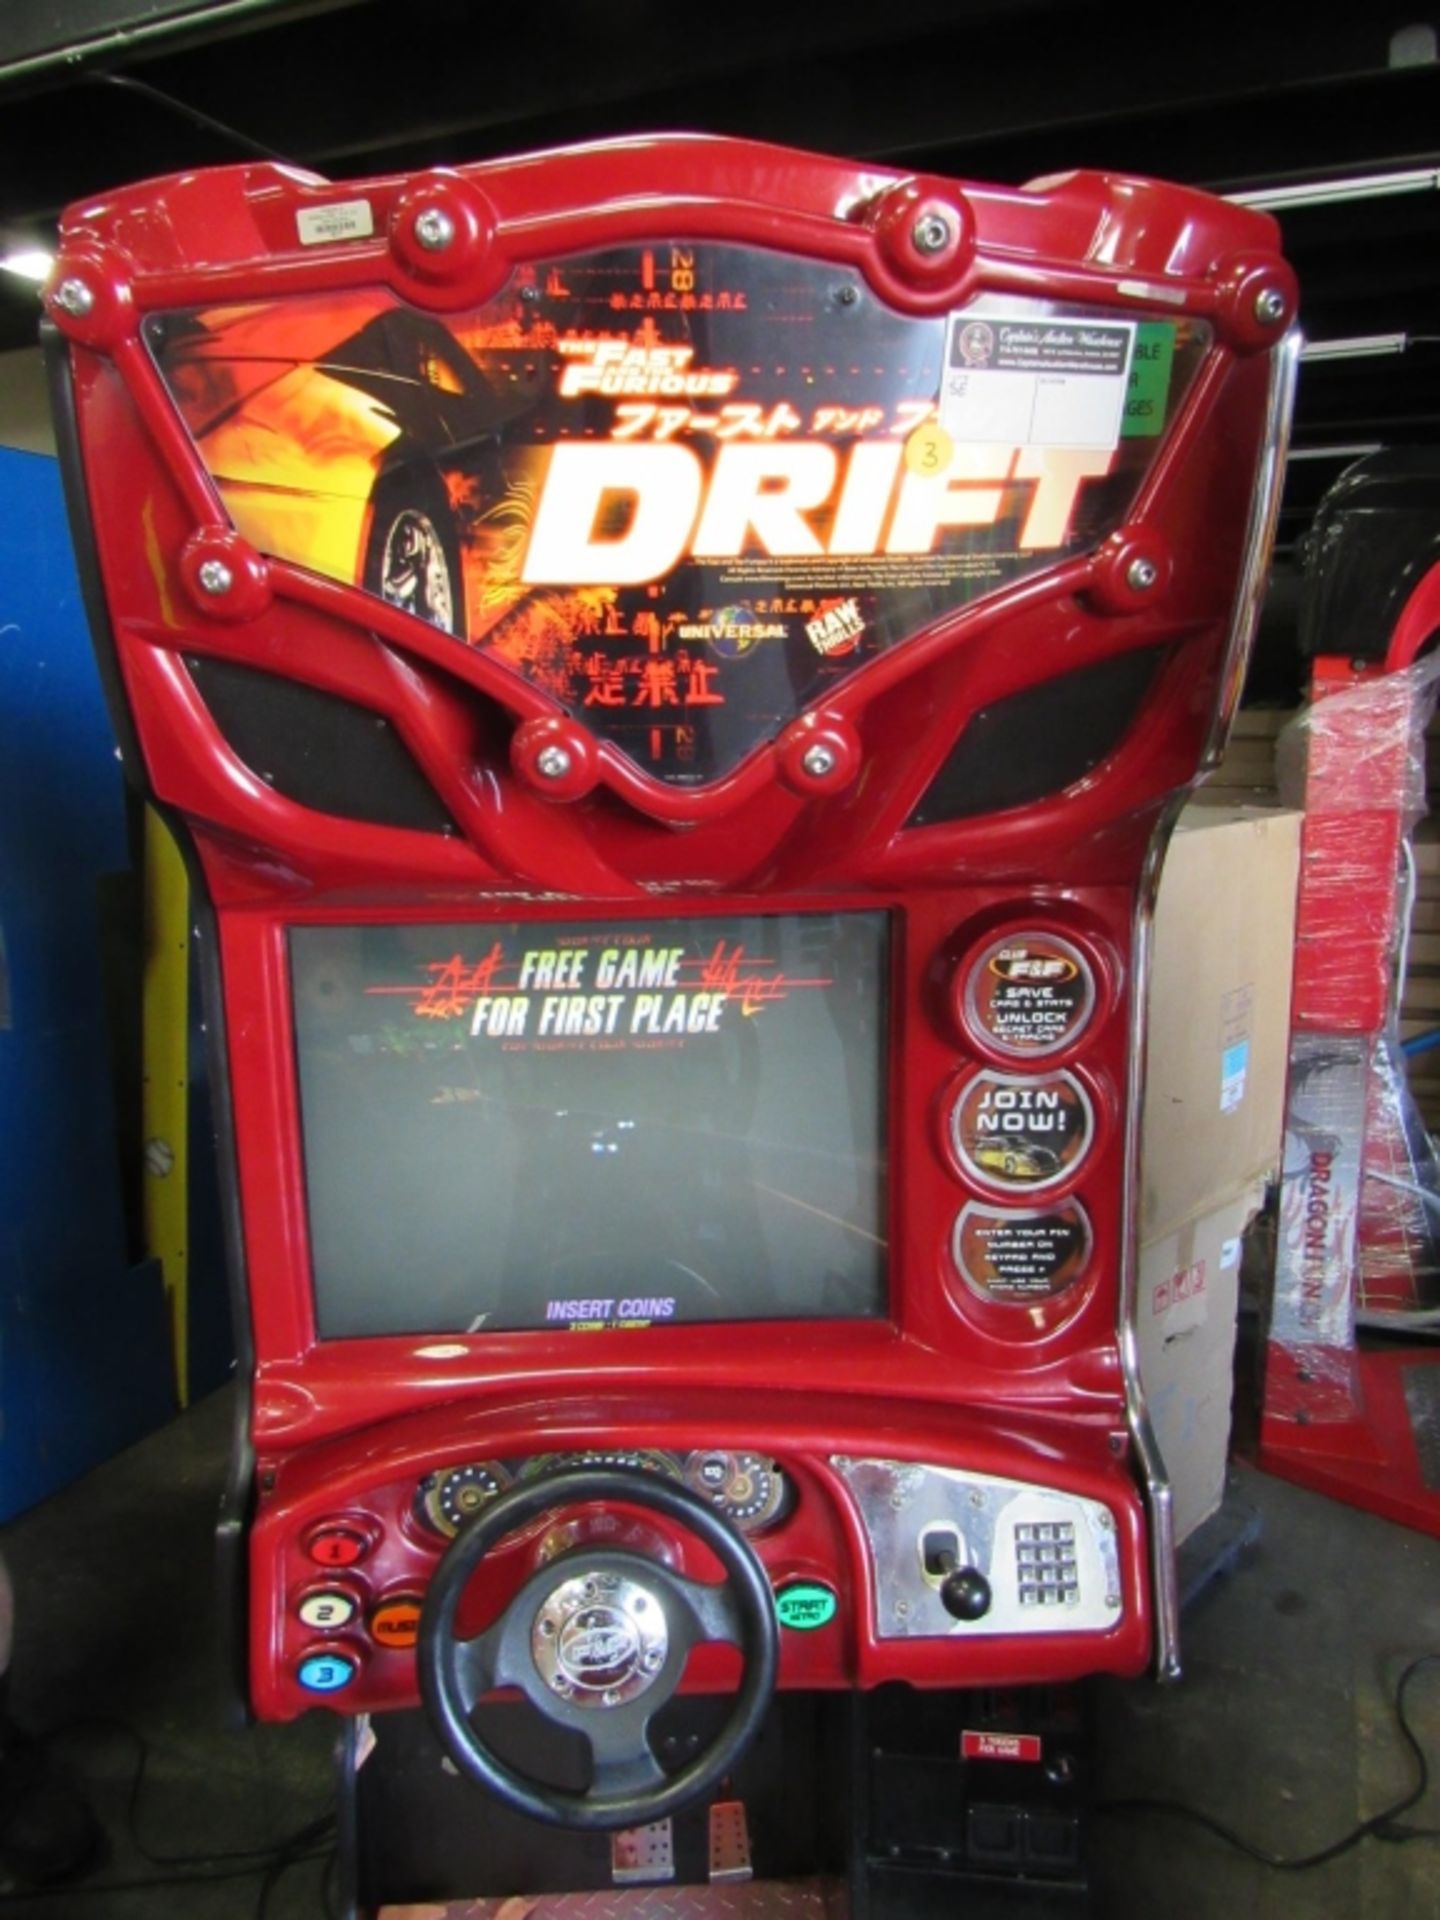 DRIFT F&F DEDICATED RED CAB RACING ARCADE GAME #3 - Image 6 of 7